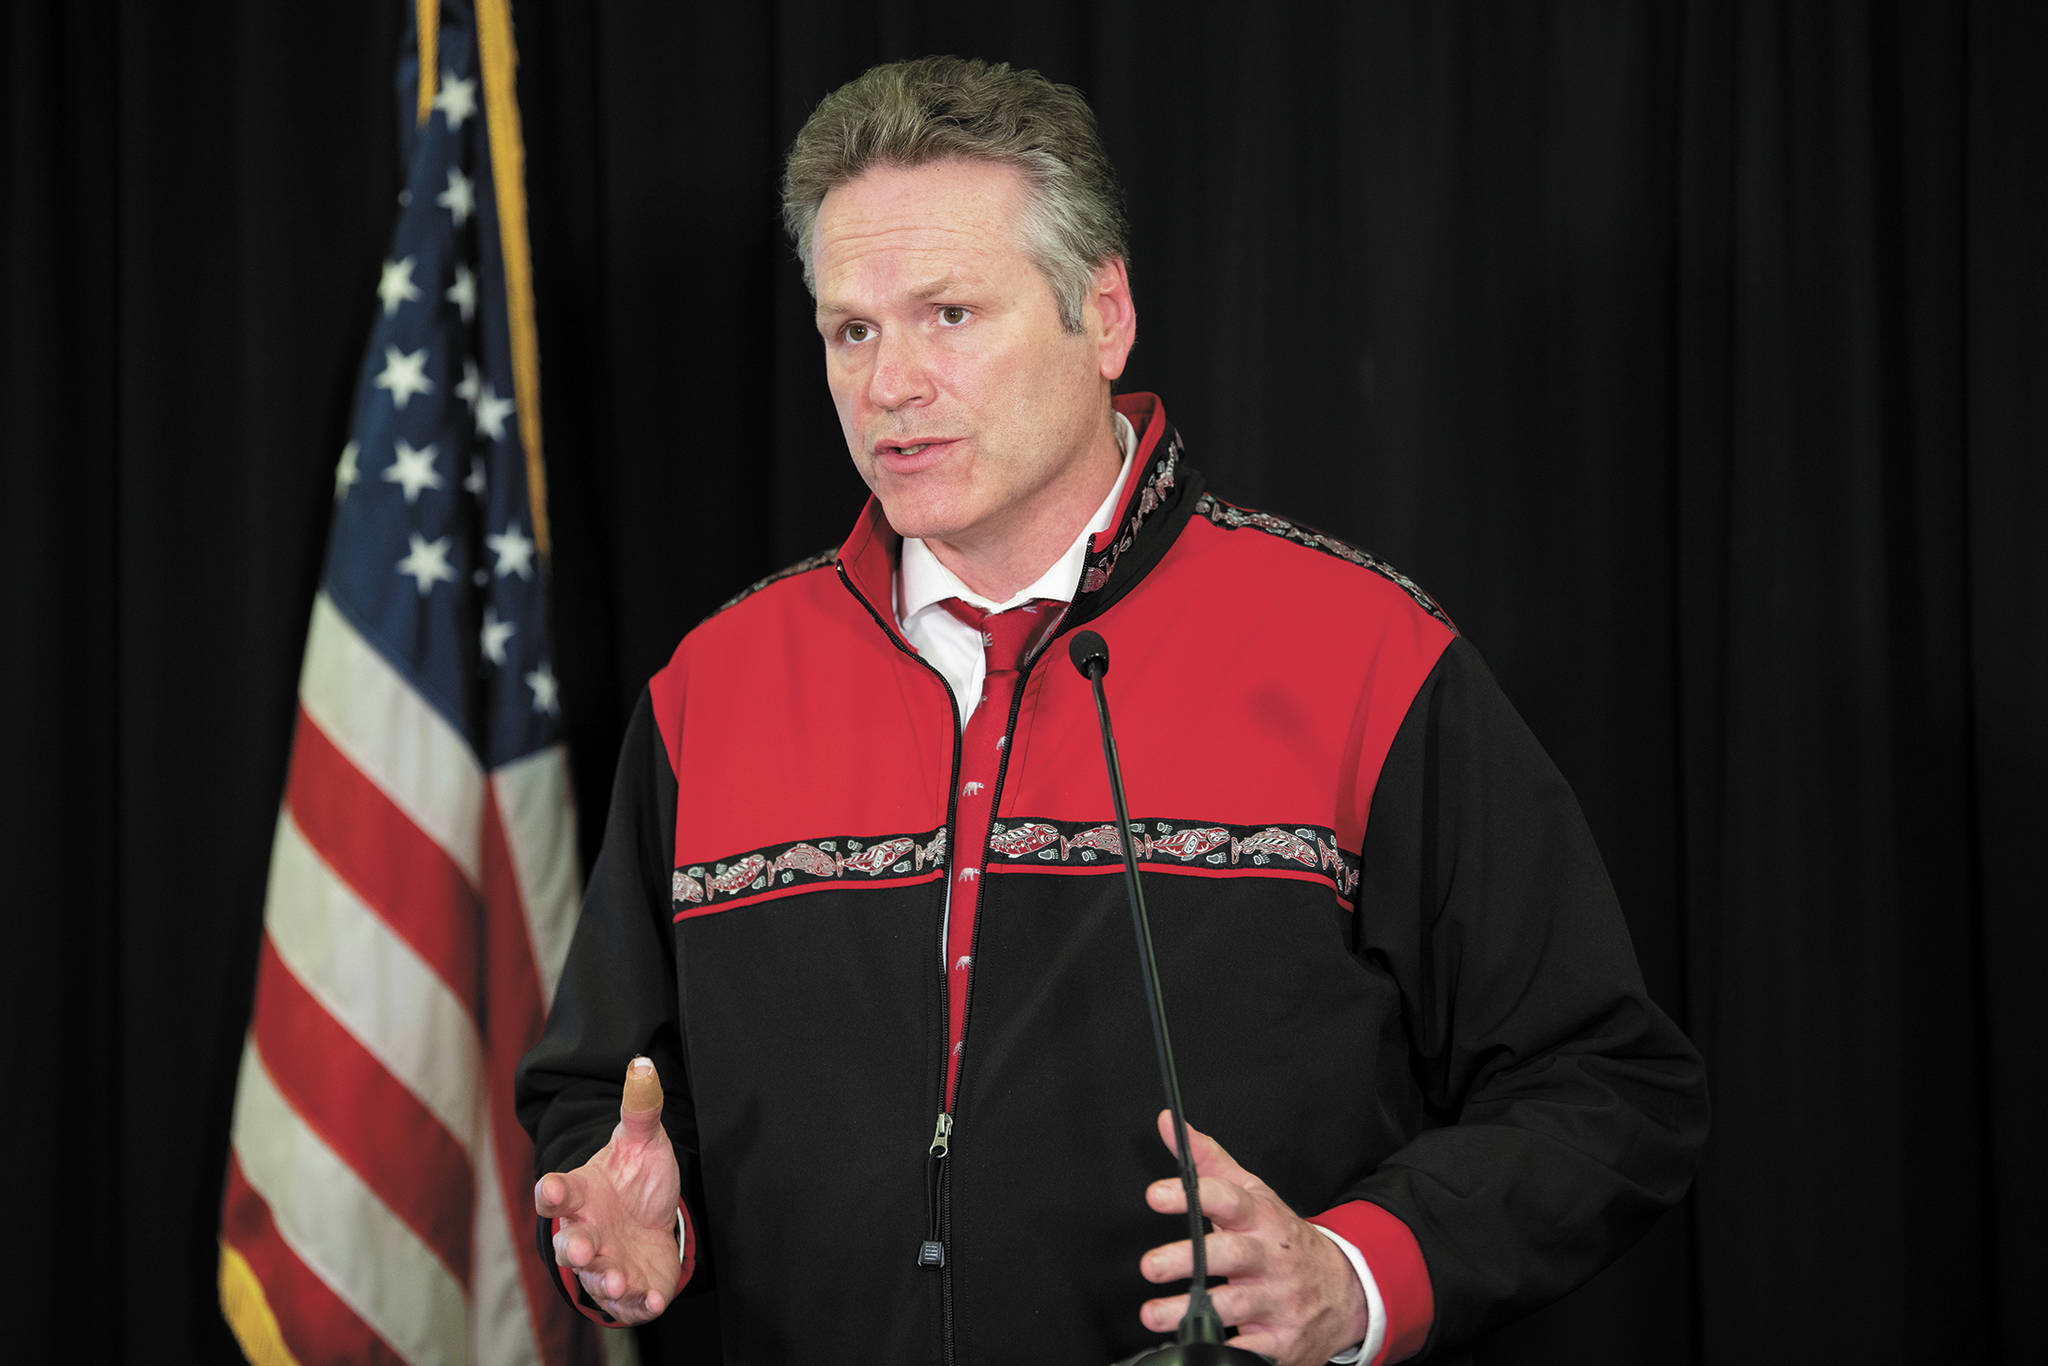 Gov. Mike Dunleavy speaks during a Tuesday, April 14, 2020 press conference in the Atwood Building in Anchorage, Alaska. (Photo courtesy Office of the Governor)